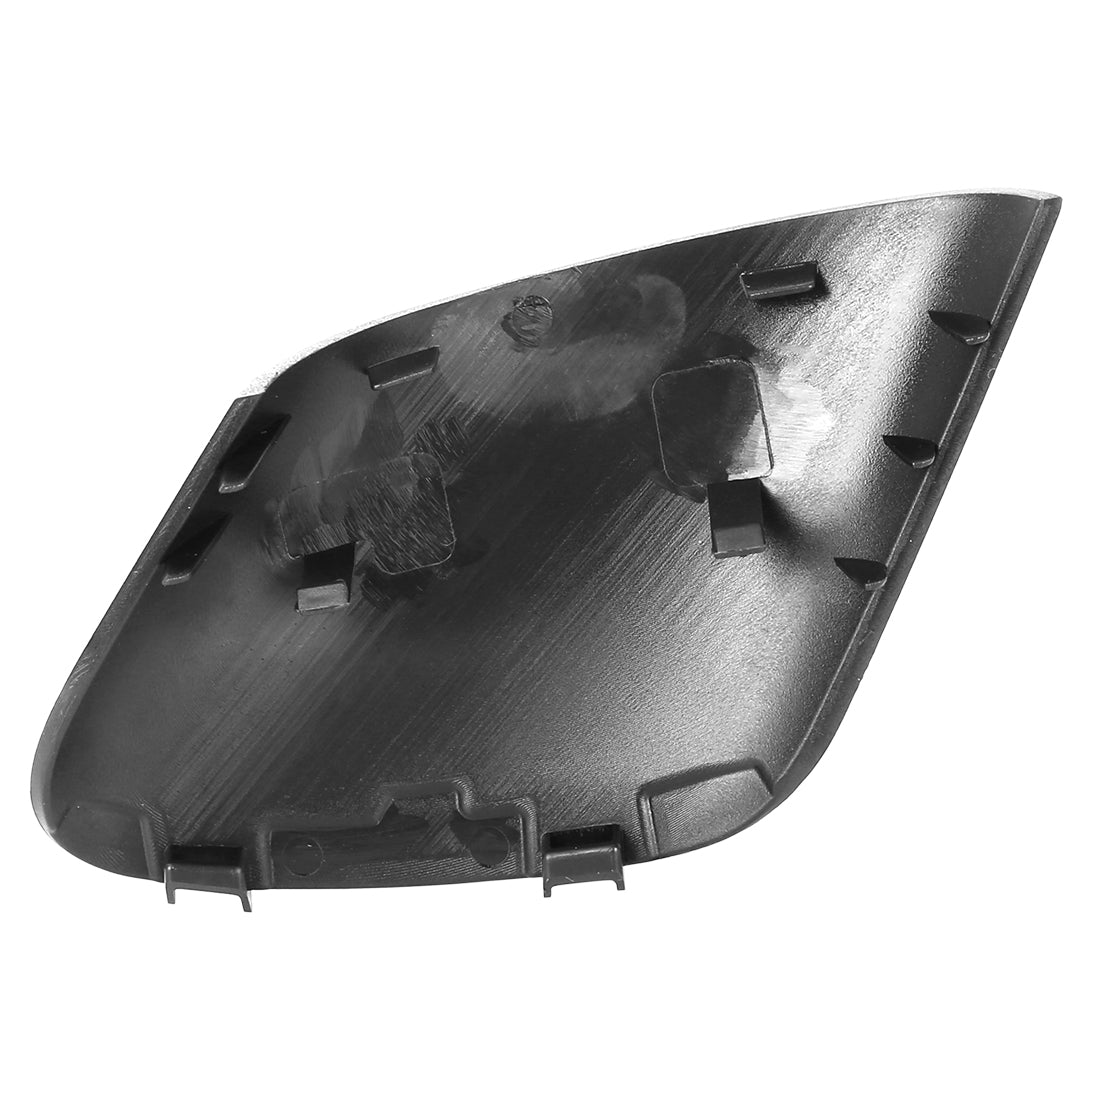 X AUTOHAUX Side View Mirror Cap Wing Door Mirror Cover for Fiat Punto 2008-2012 - Right Hand